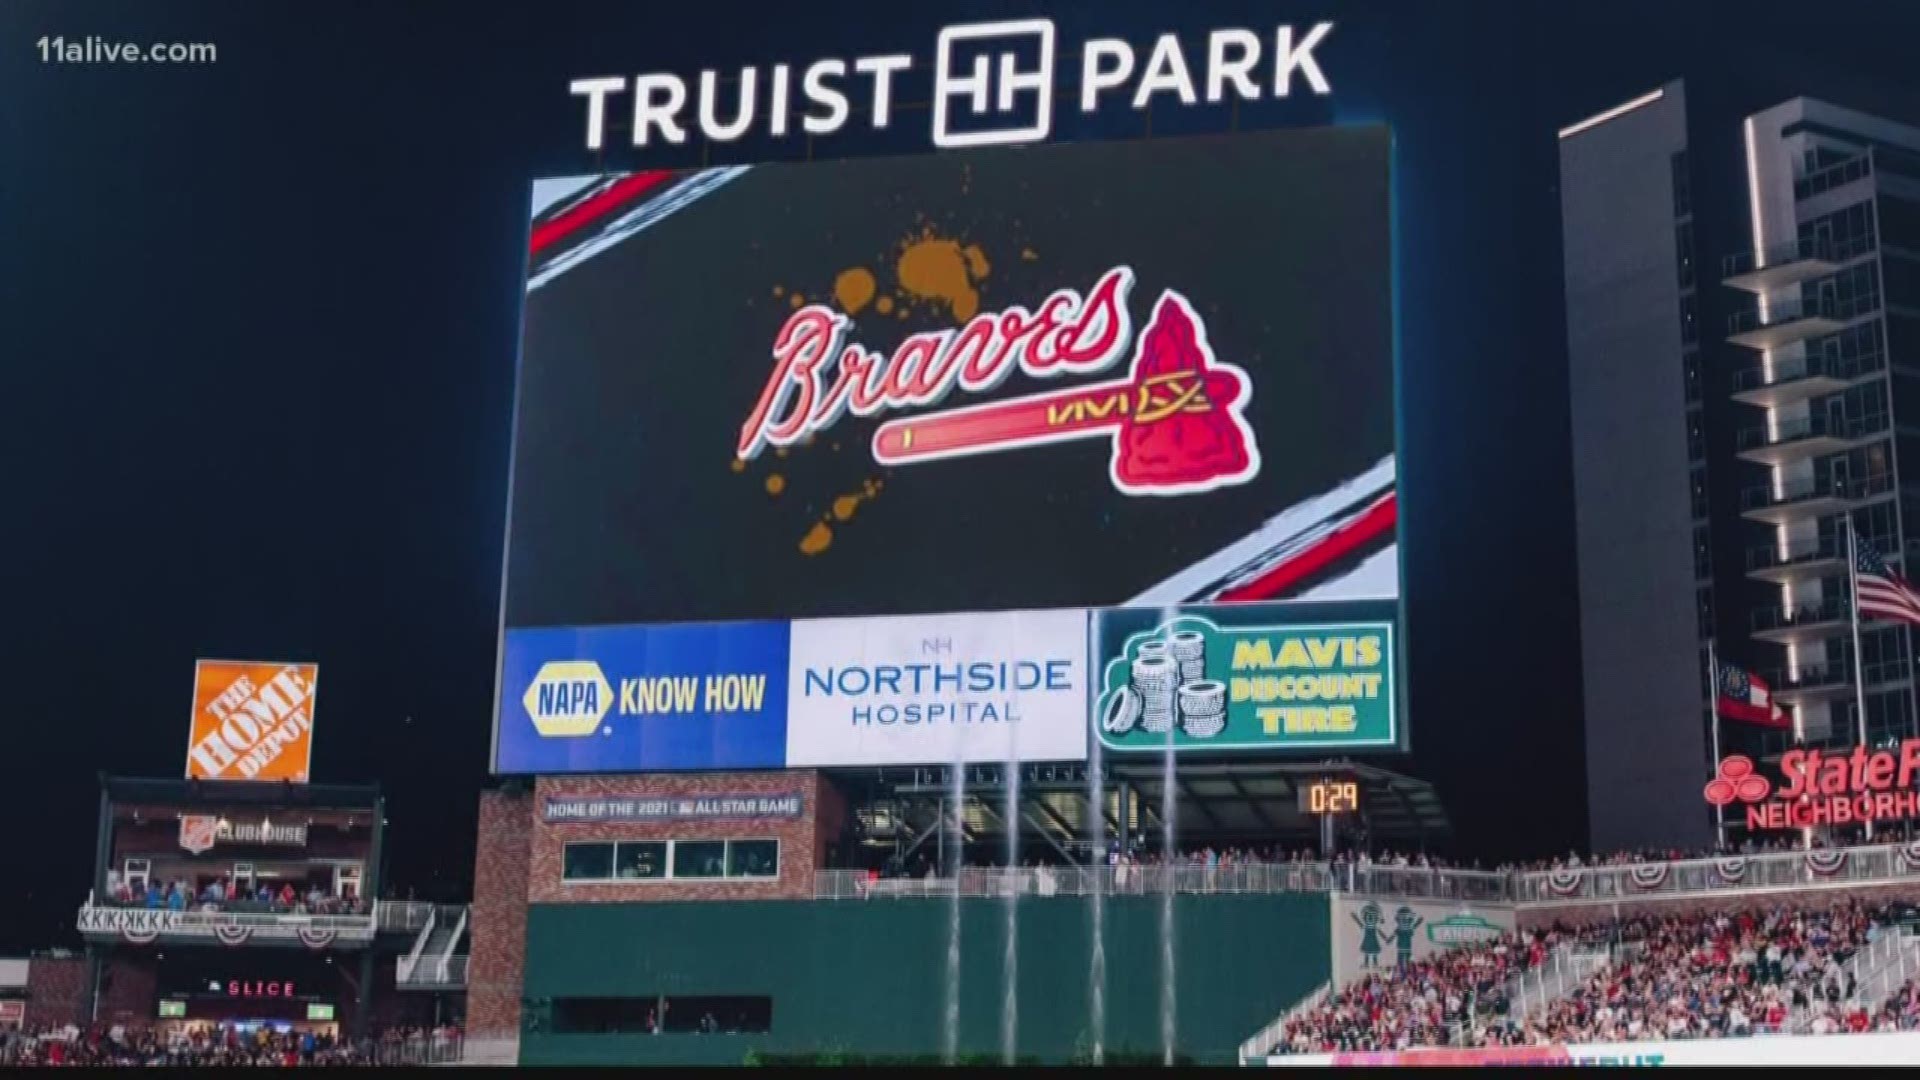 Truist Park: Home of the Braves